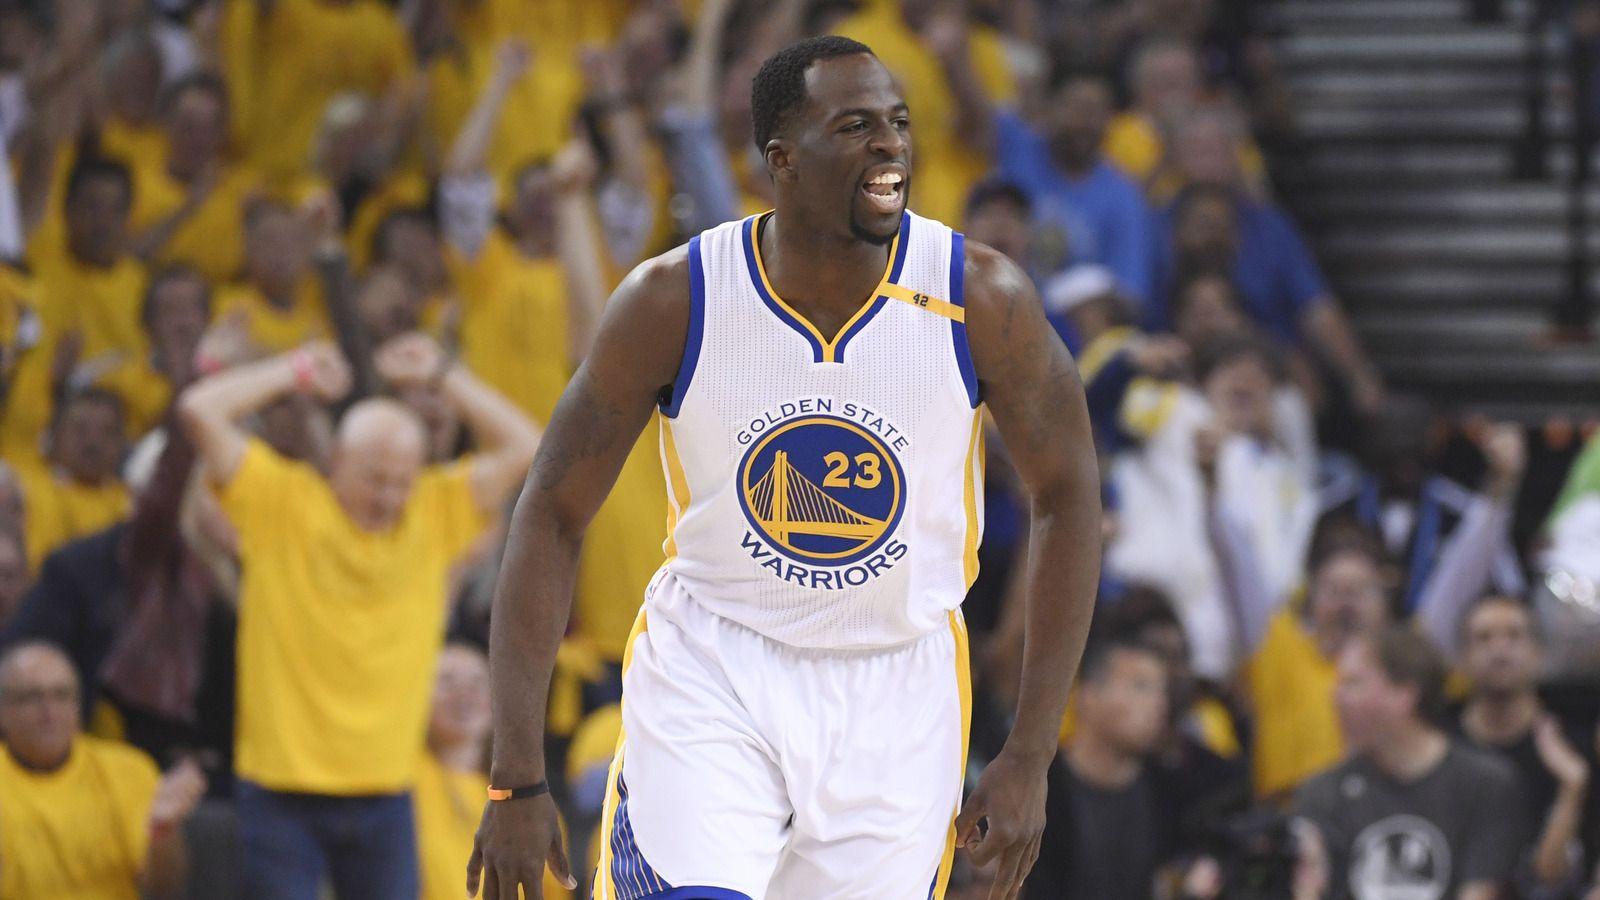 WATCH: Draymond Green Catches Upside Down Klay Thompson In Mid Air